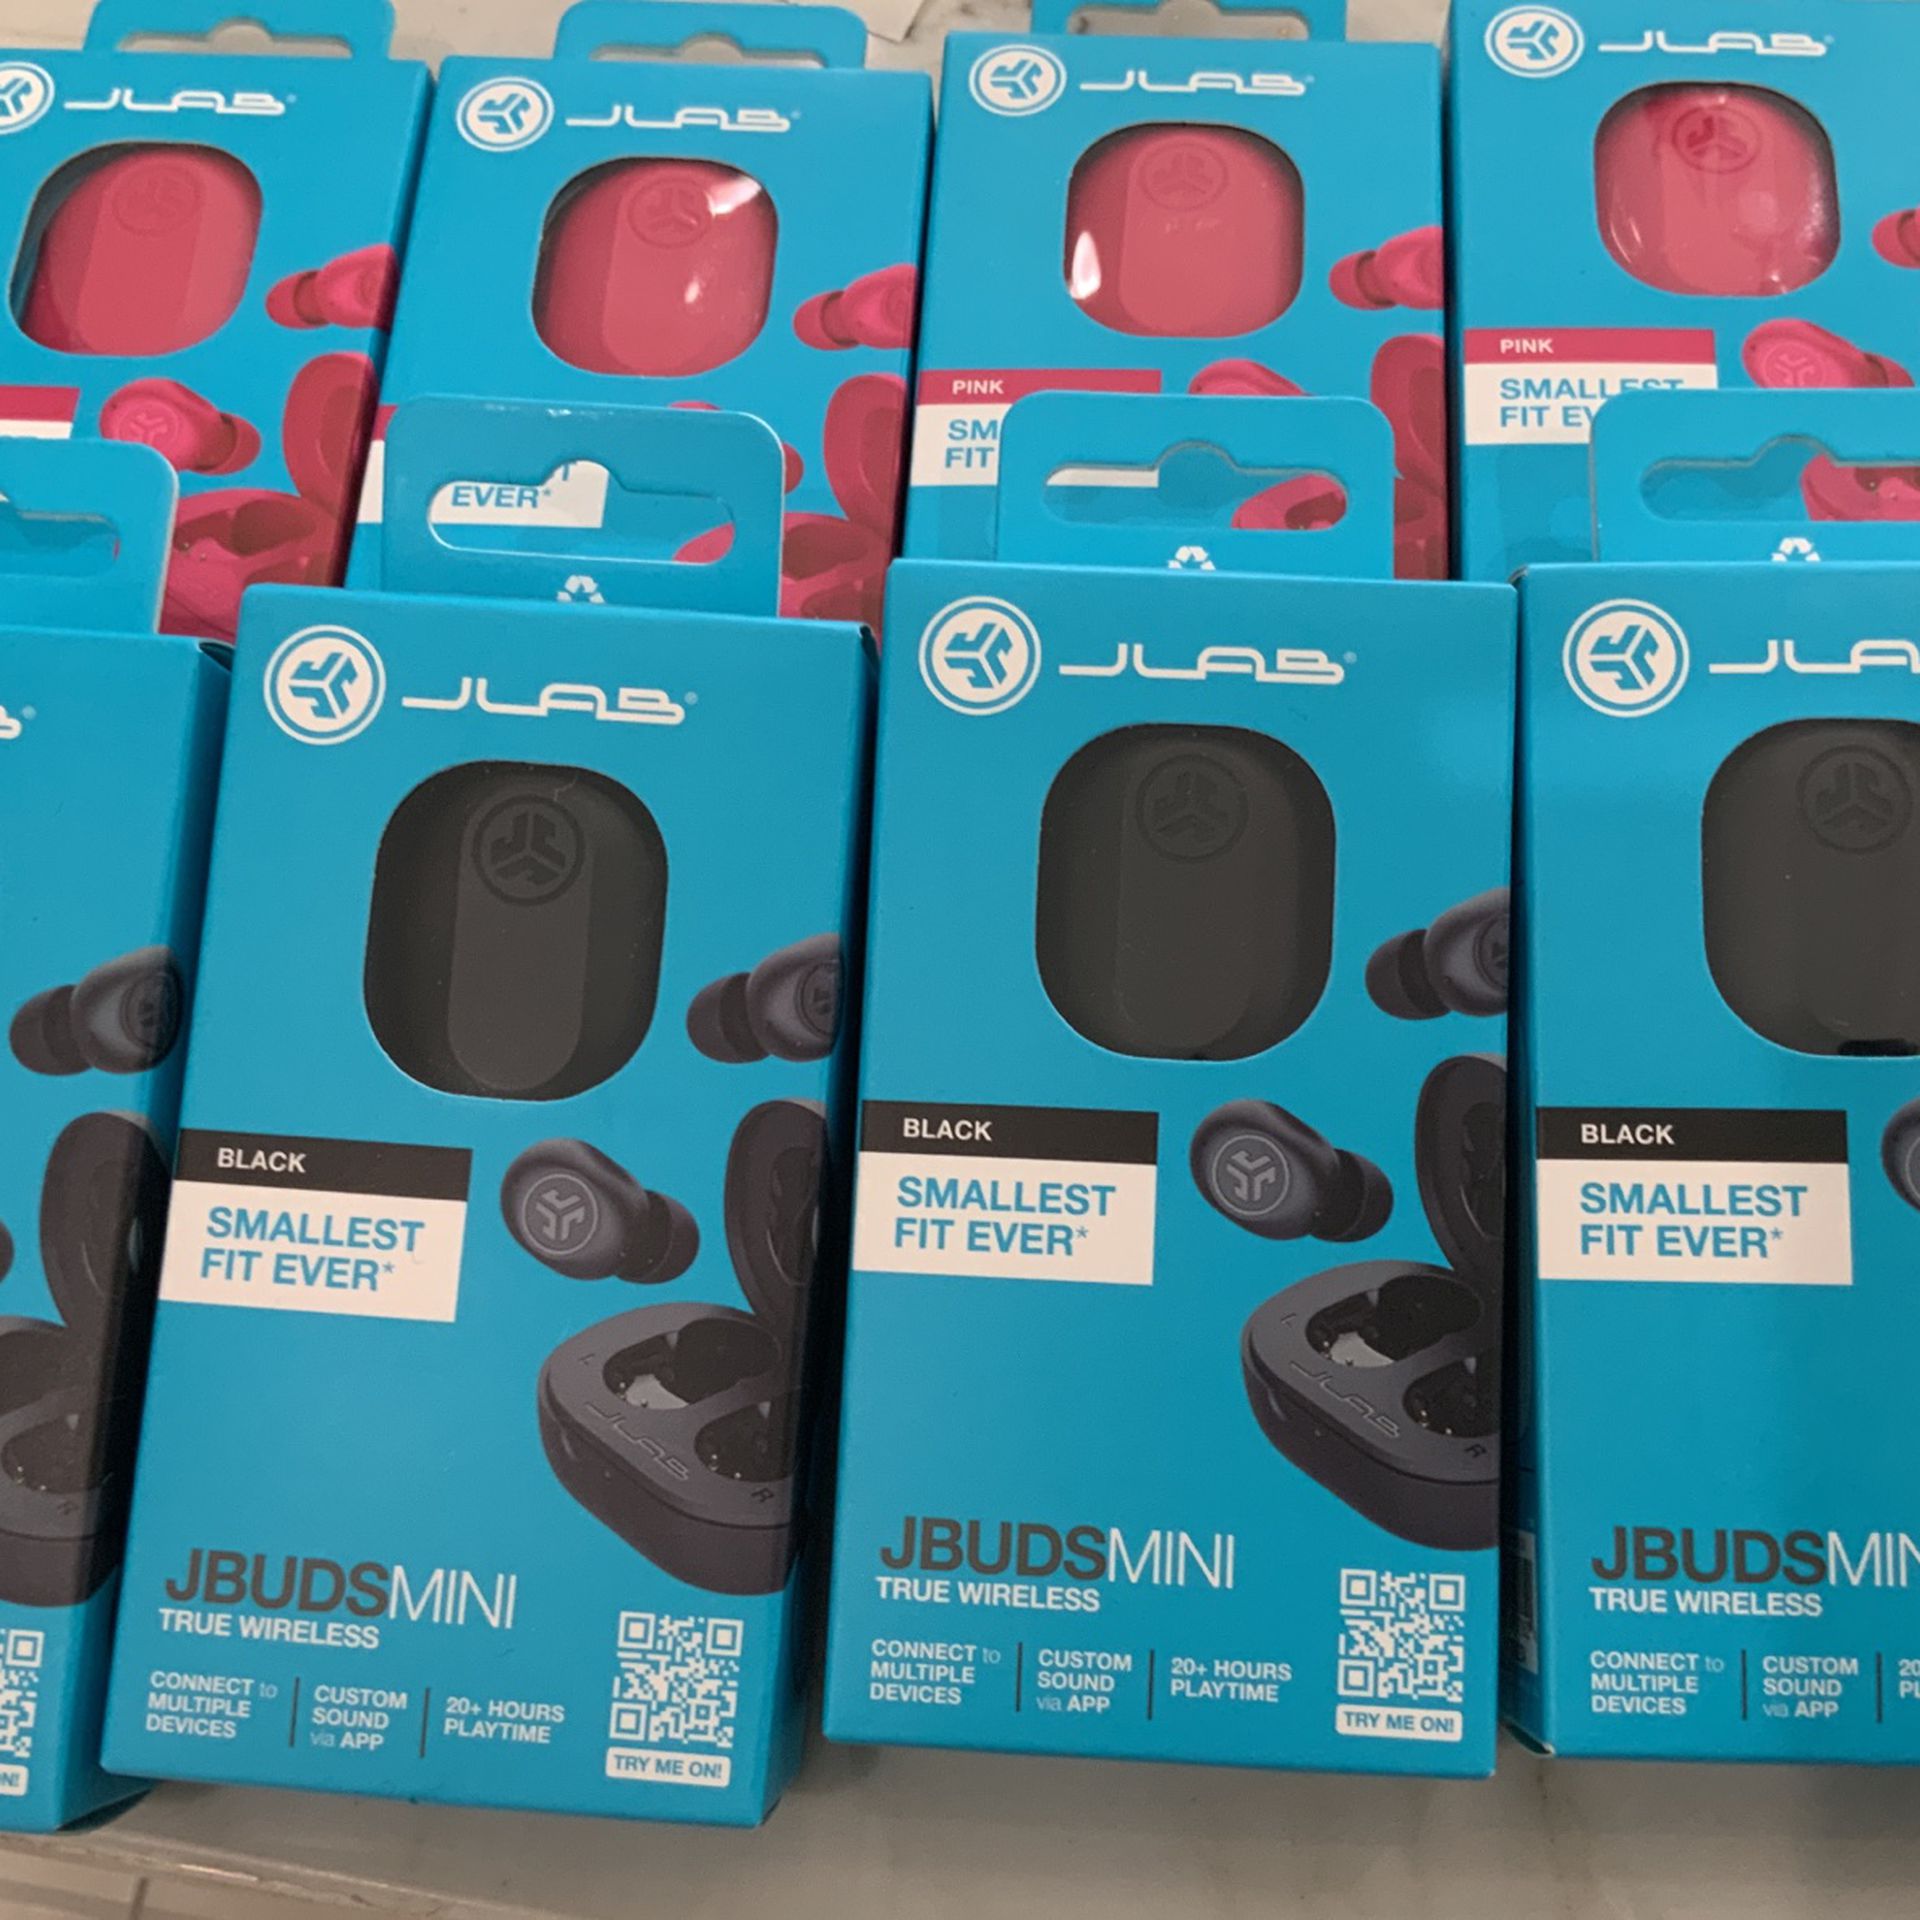 Dealer Alert Selling All Together 9 Brand New Jlab Jbuds Mini Wireless Earbuds All Never Opened Priced Right For Re Sellers 